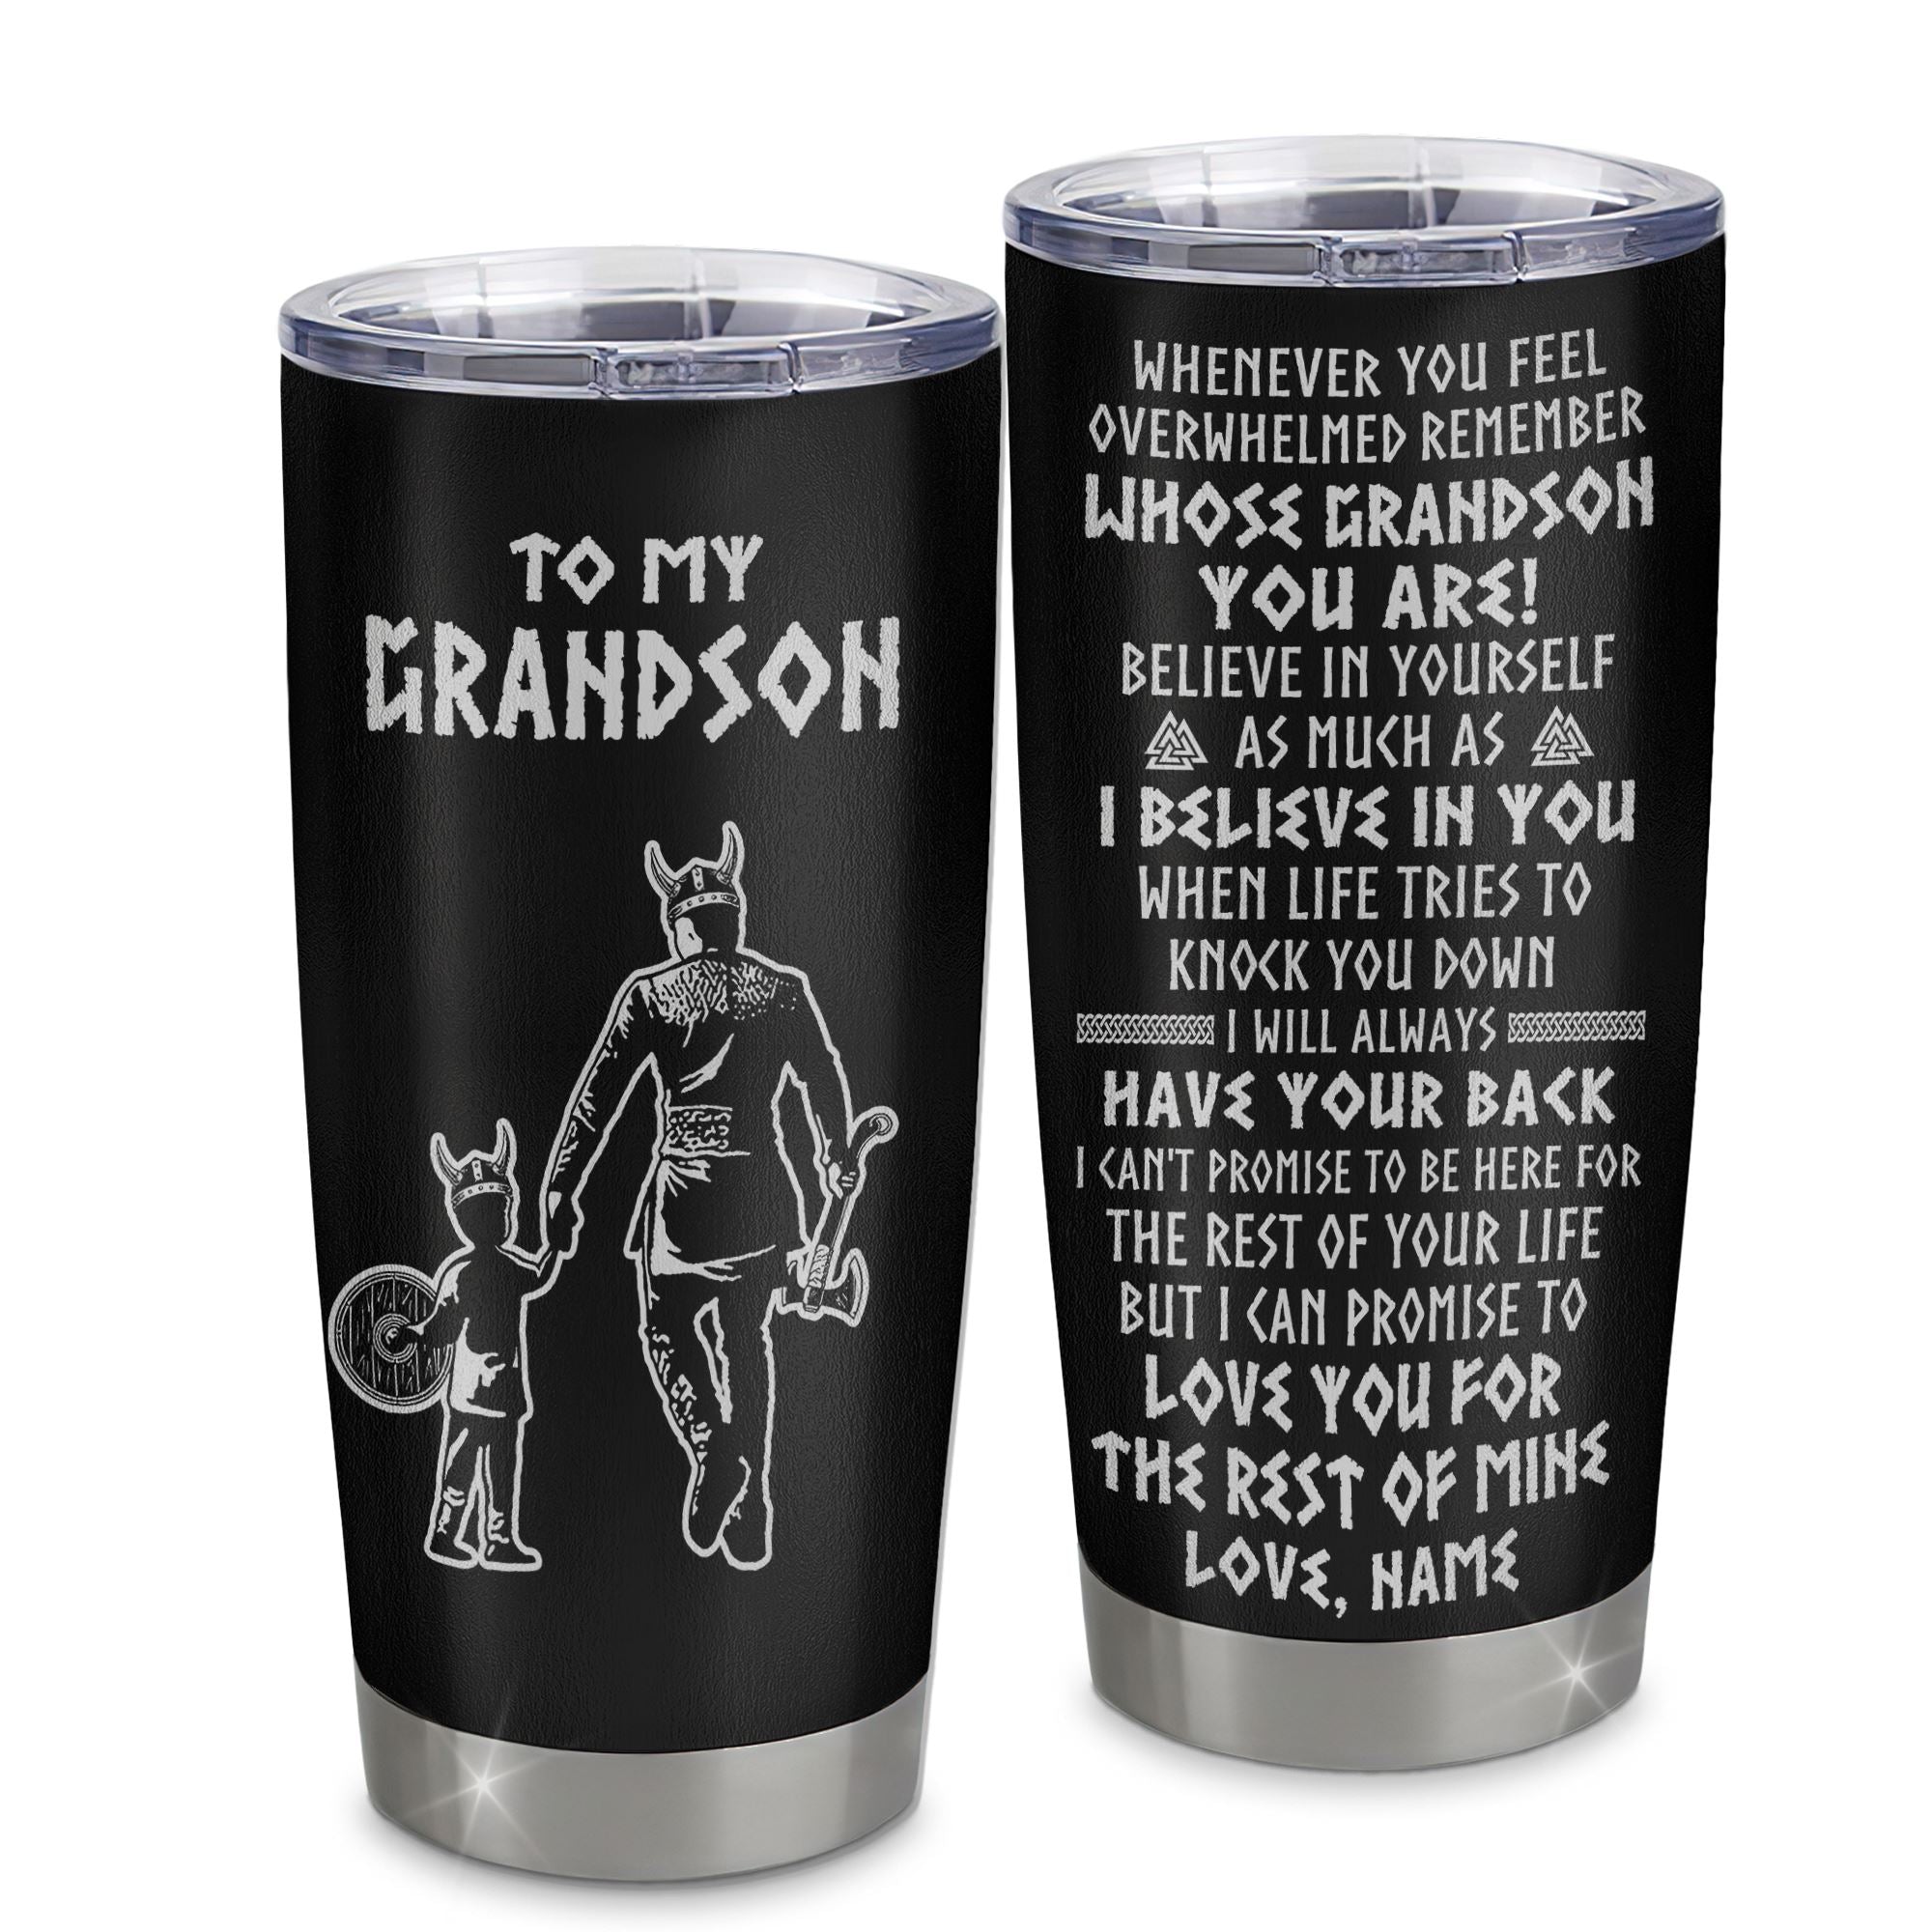 Personalized_To_My_Grandson_Viking_Tumbler_From_Grandpa_Papa_Stainless_Steel_Cup_Whenever_You_Feel_Overwhelmed_Grandson_Birthday_Christmas_Travel_Mug_Tumbler_mockup_1.jpg